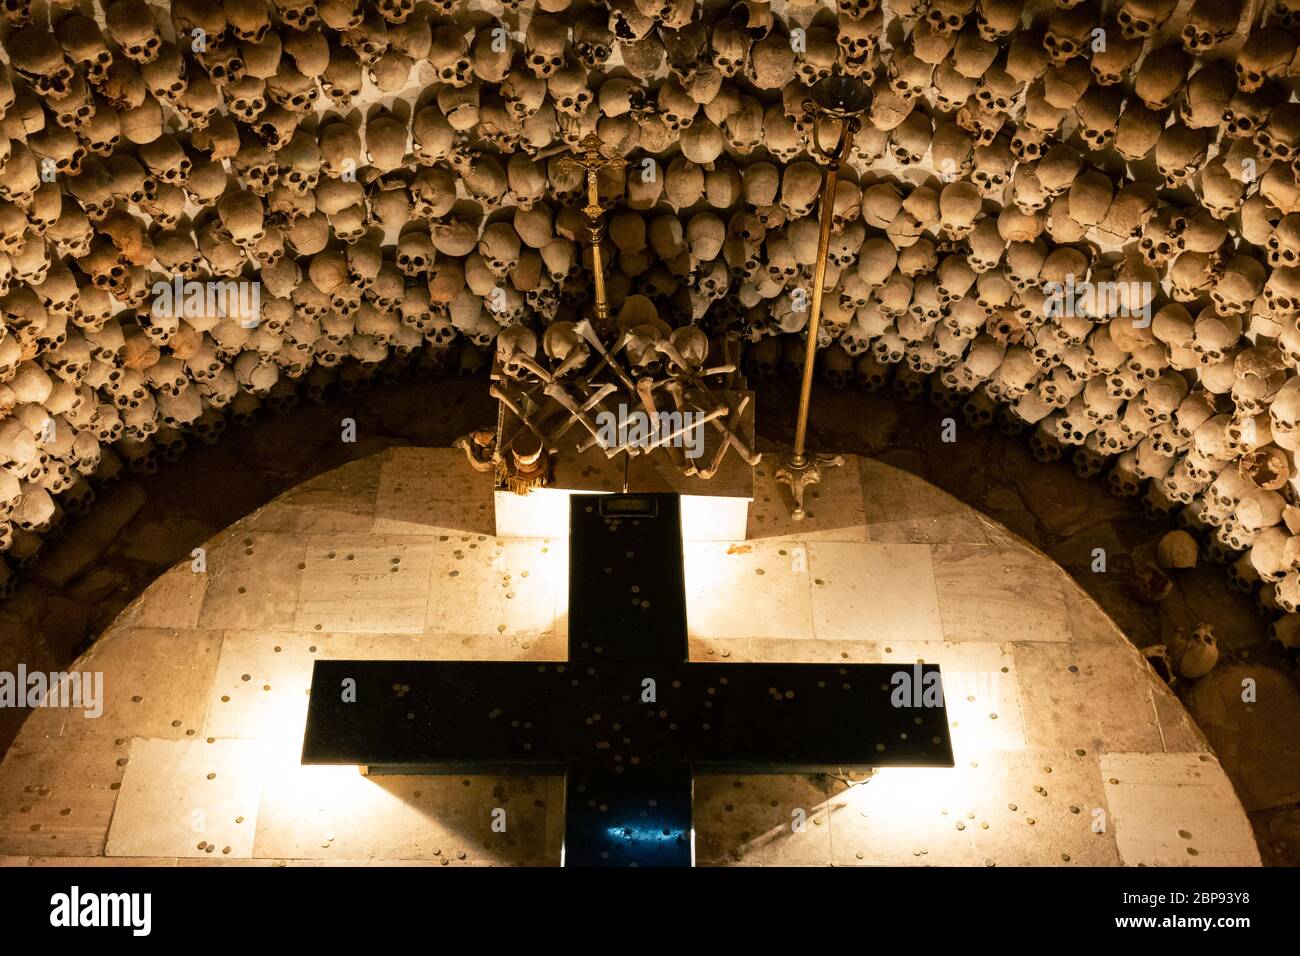 Christian church in Lampa, Peru where they have remains of people exposed to tourists. One Stock Photo